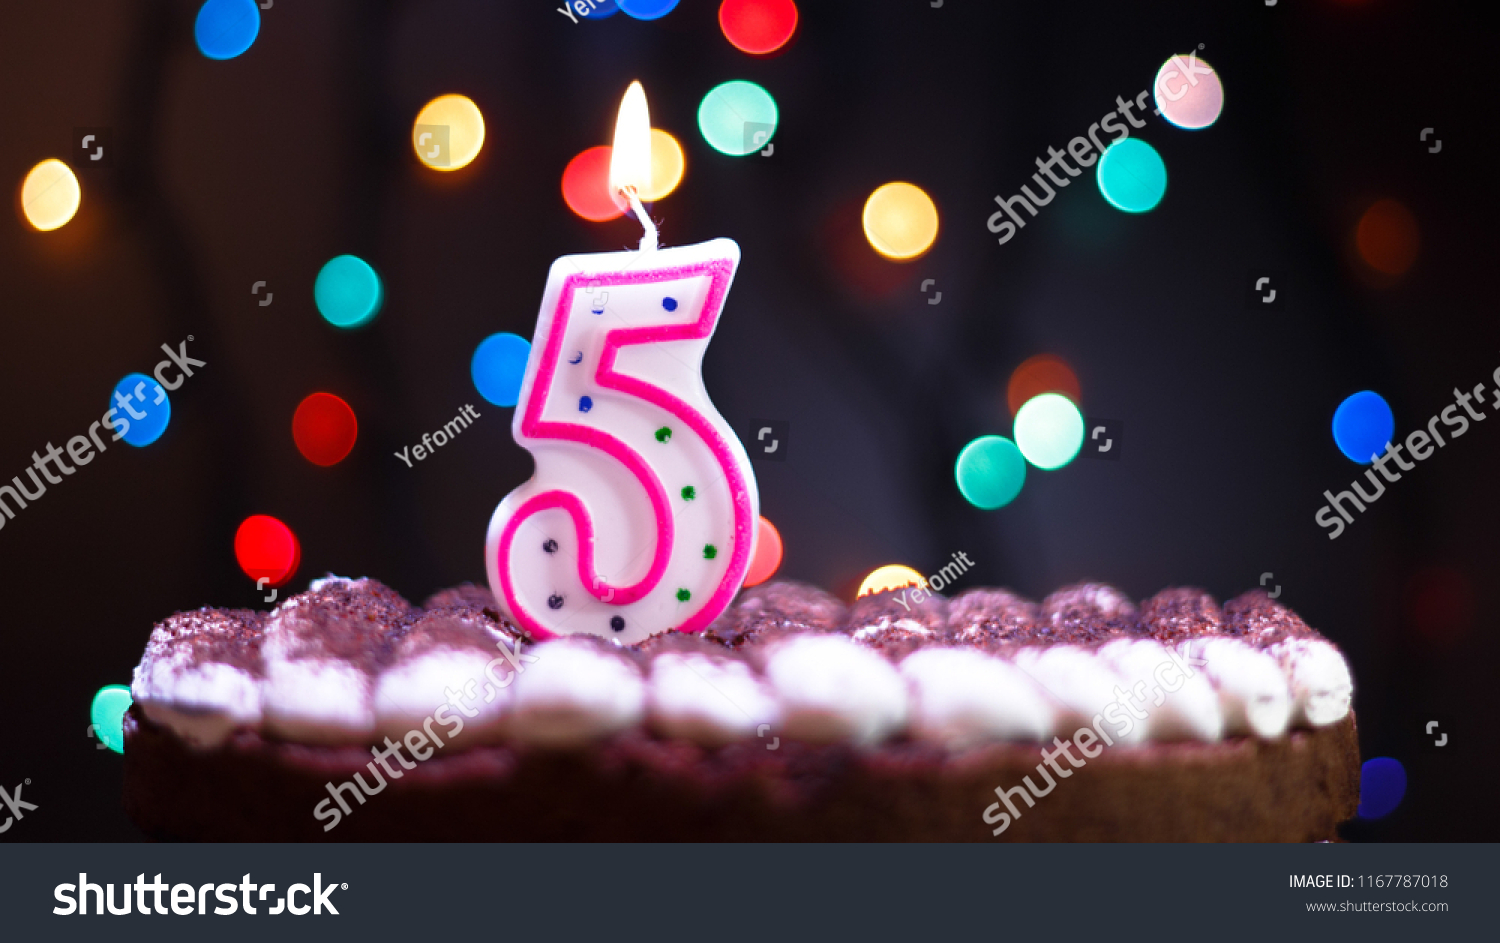 Happy Birthday.Holiday cake with candles.Birthday greetings.Greeting card.Colorful birthday candles.Five years.Growing up.Abstract colorful background.Colorful bokeh.Top view.Stop motion. #1167787018